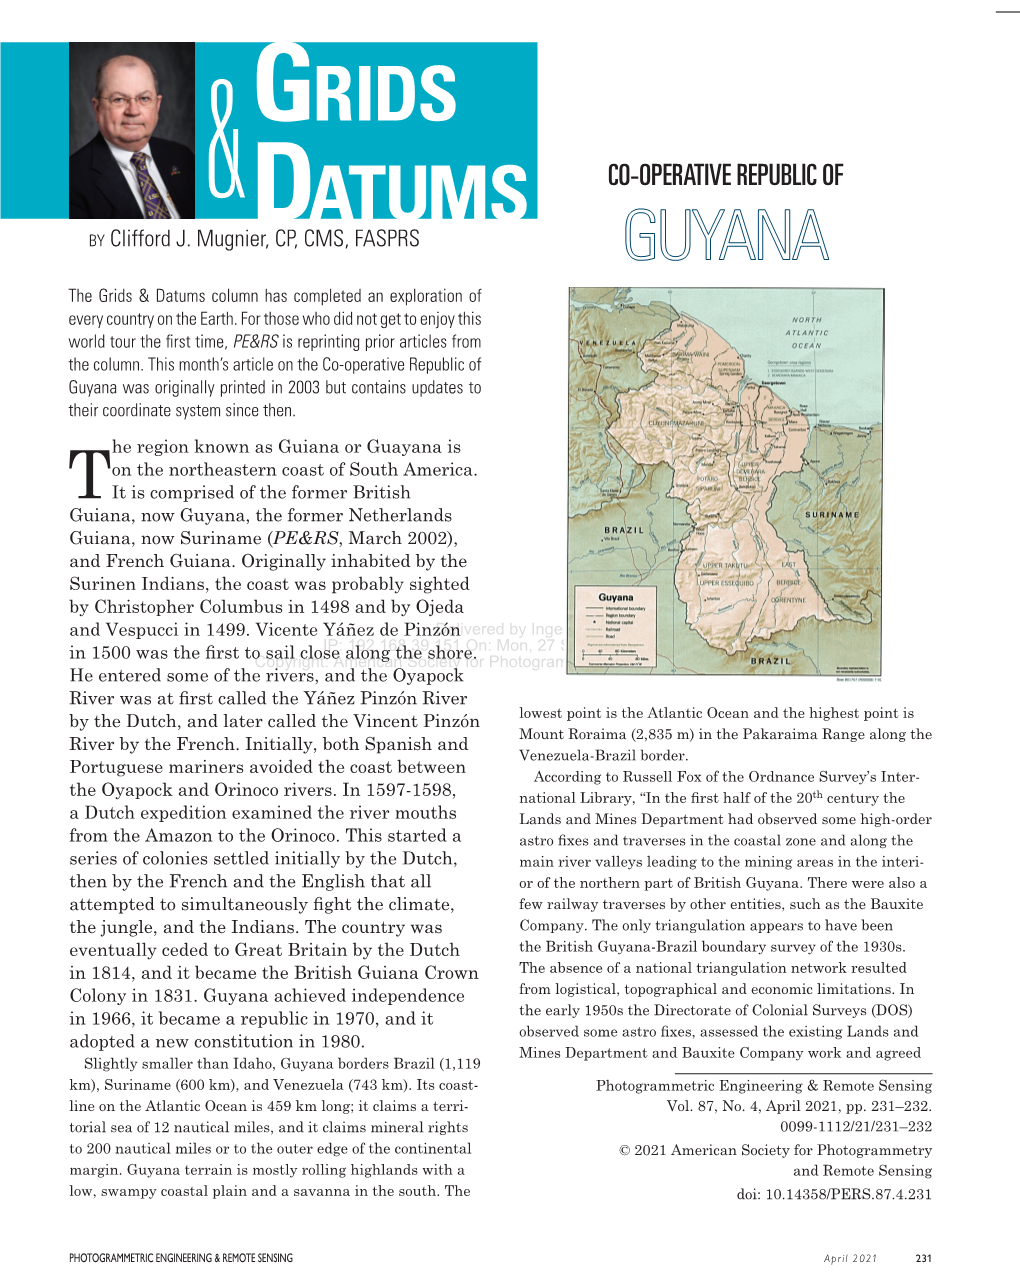 Grids and Datums Update: Co-Operative Republic of Guyana